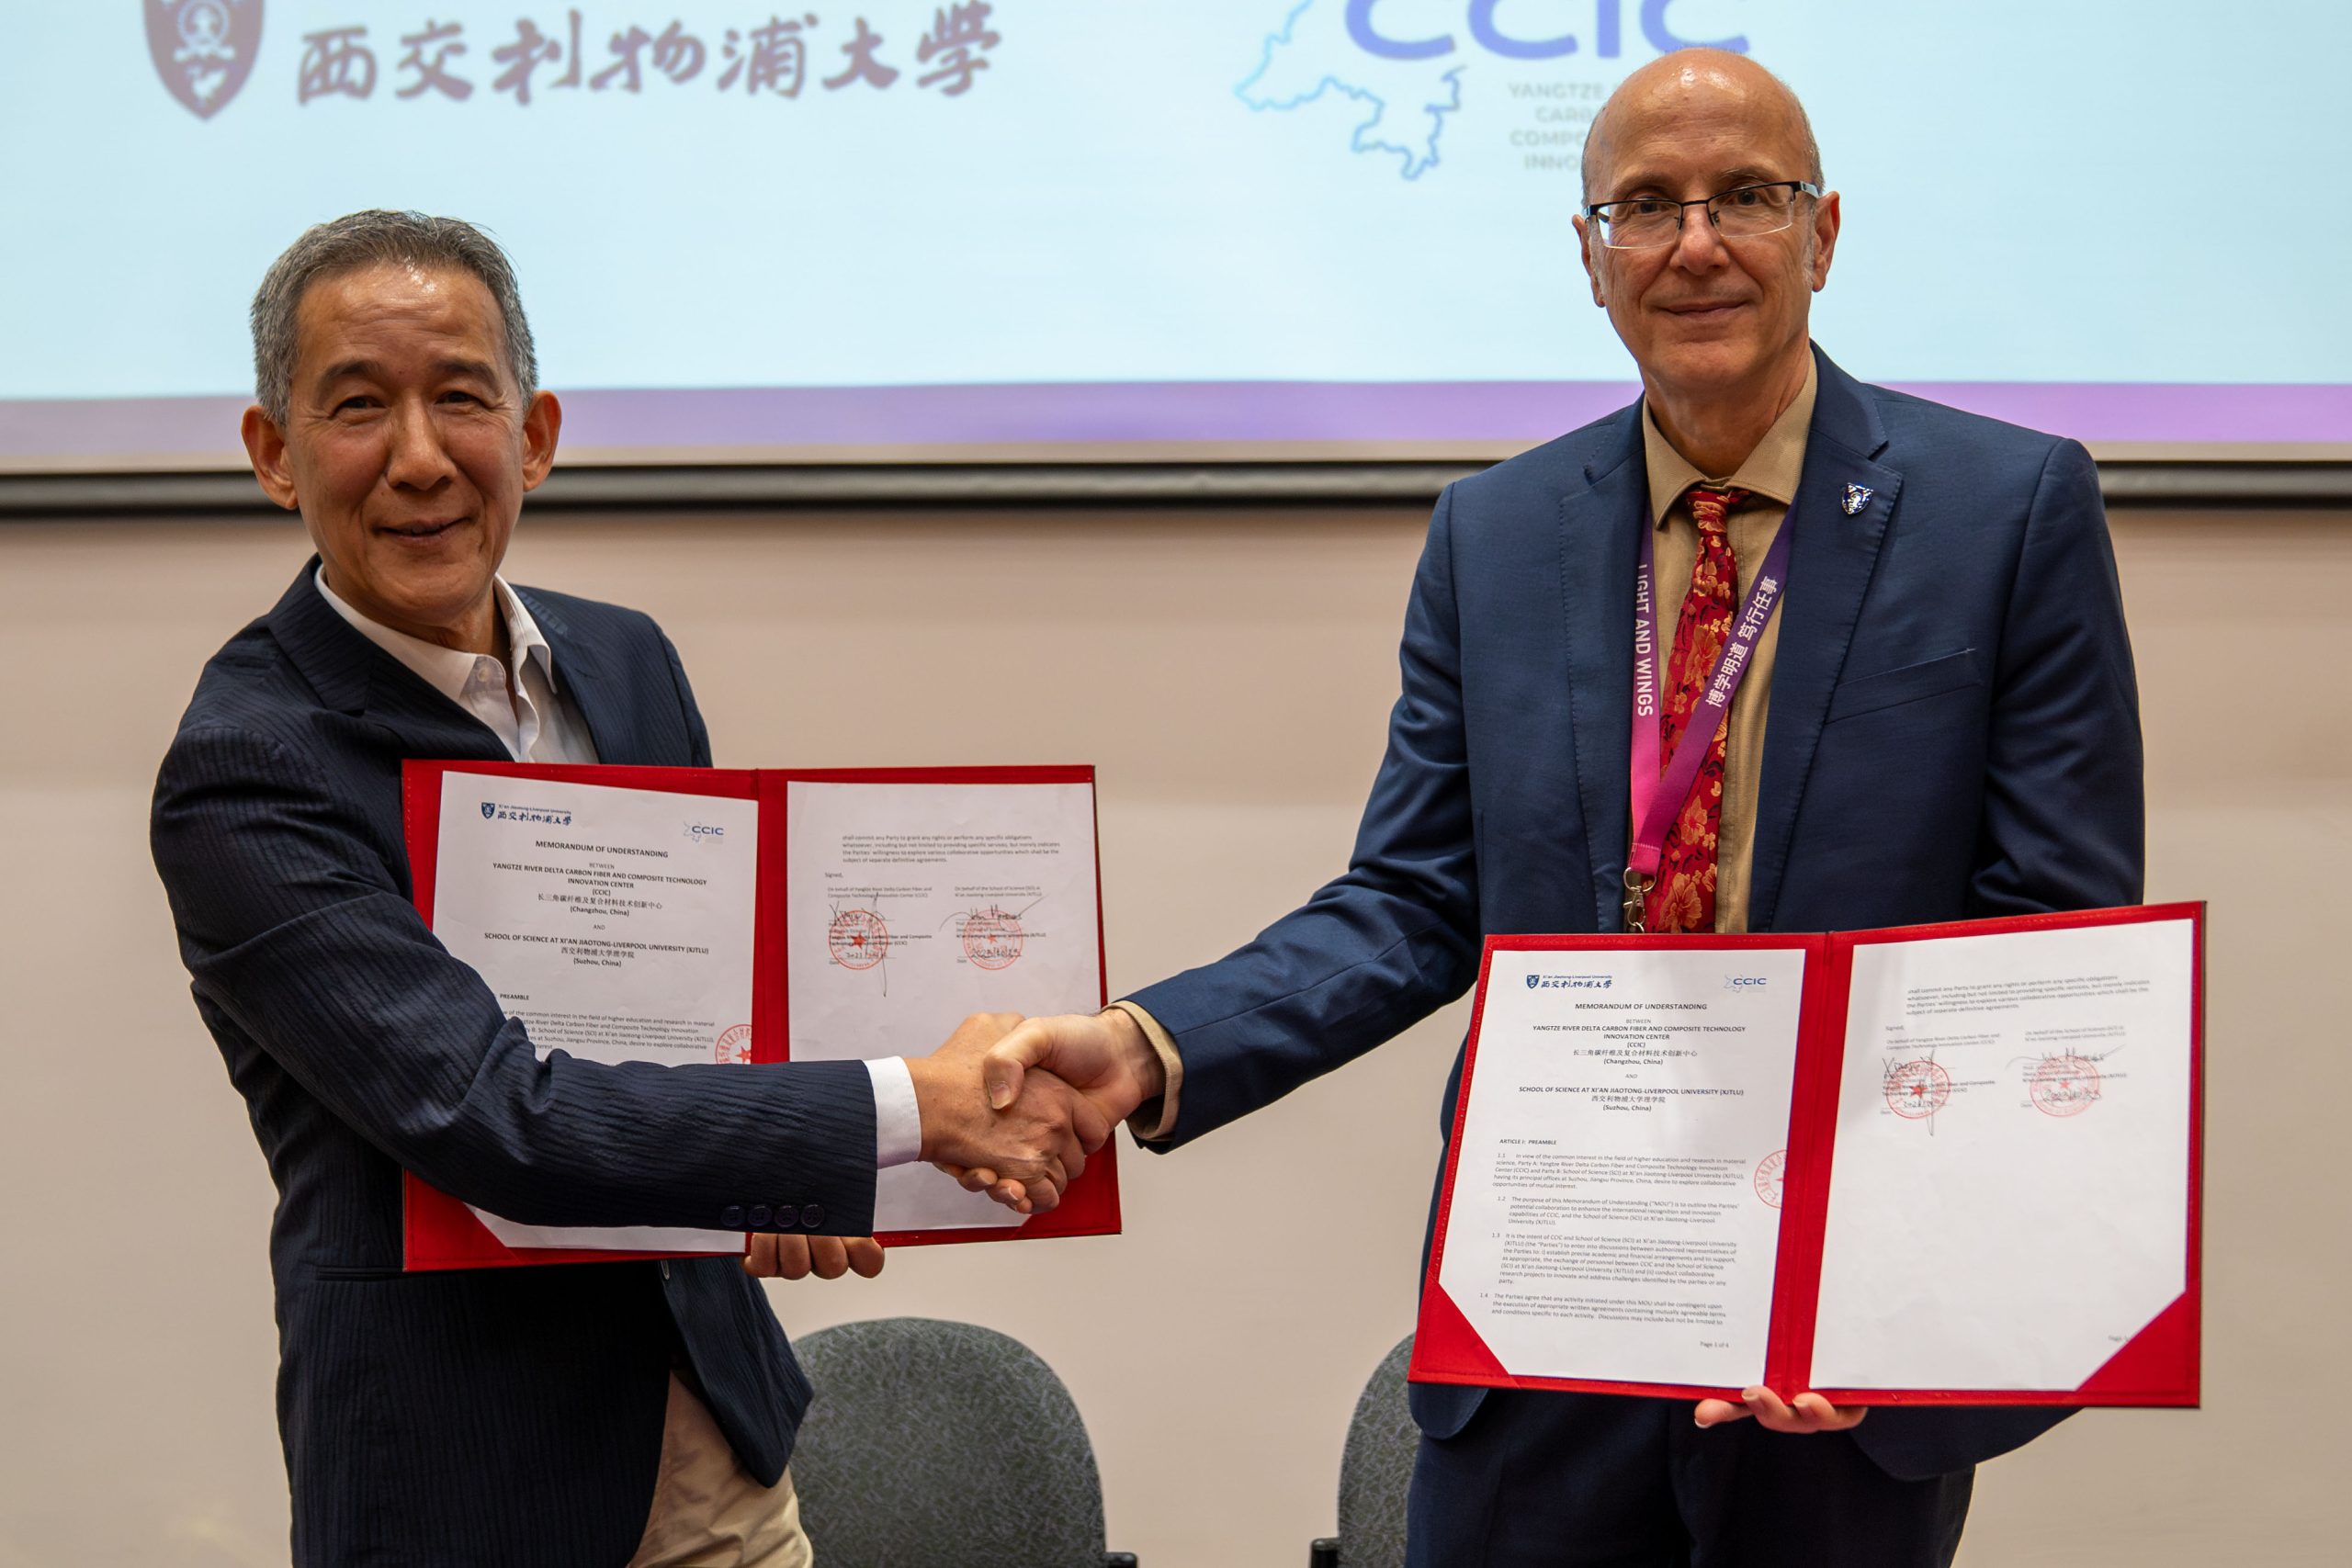 MoU Ceremony Celebrating the Launch of the XJTLU SCI – CCIC International Joint Frontiers Materials Research Lab